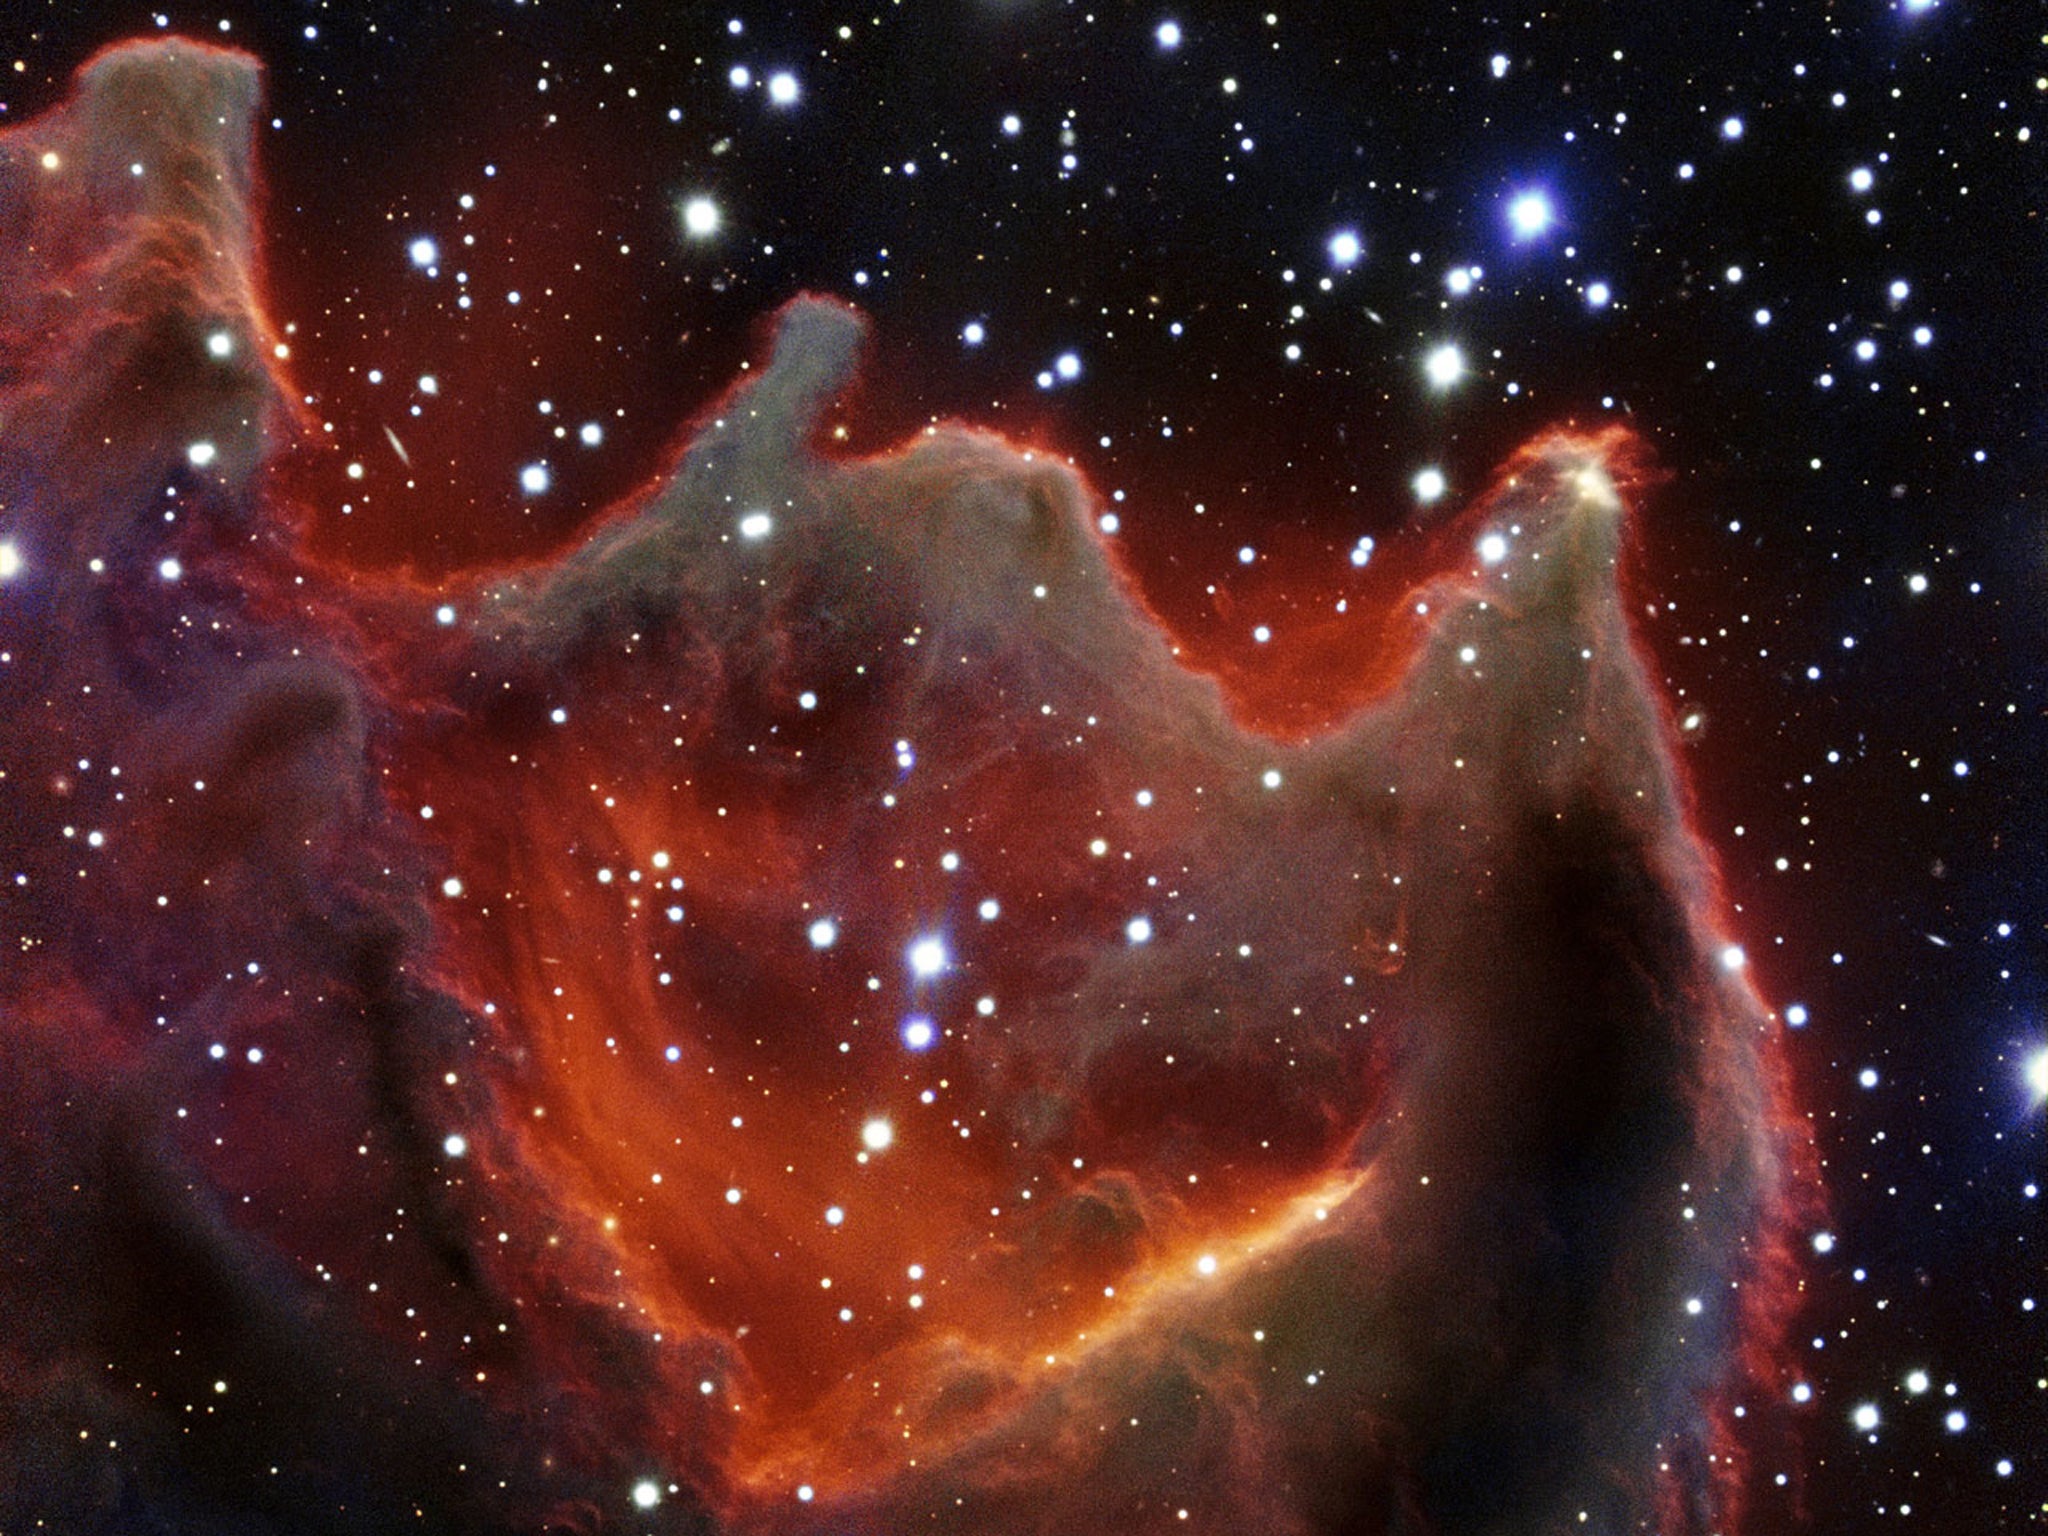 Like the gaping mouth of a gigantic celestial creature, the cometary globule CG4 glows menacingly in this new image from ESO’s Very Large Telescope. Although it appears to be big and bright in this picture, this is actually a faint nebula, which makes it